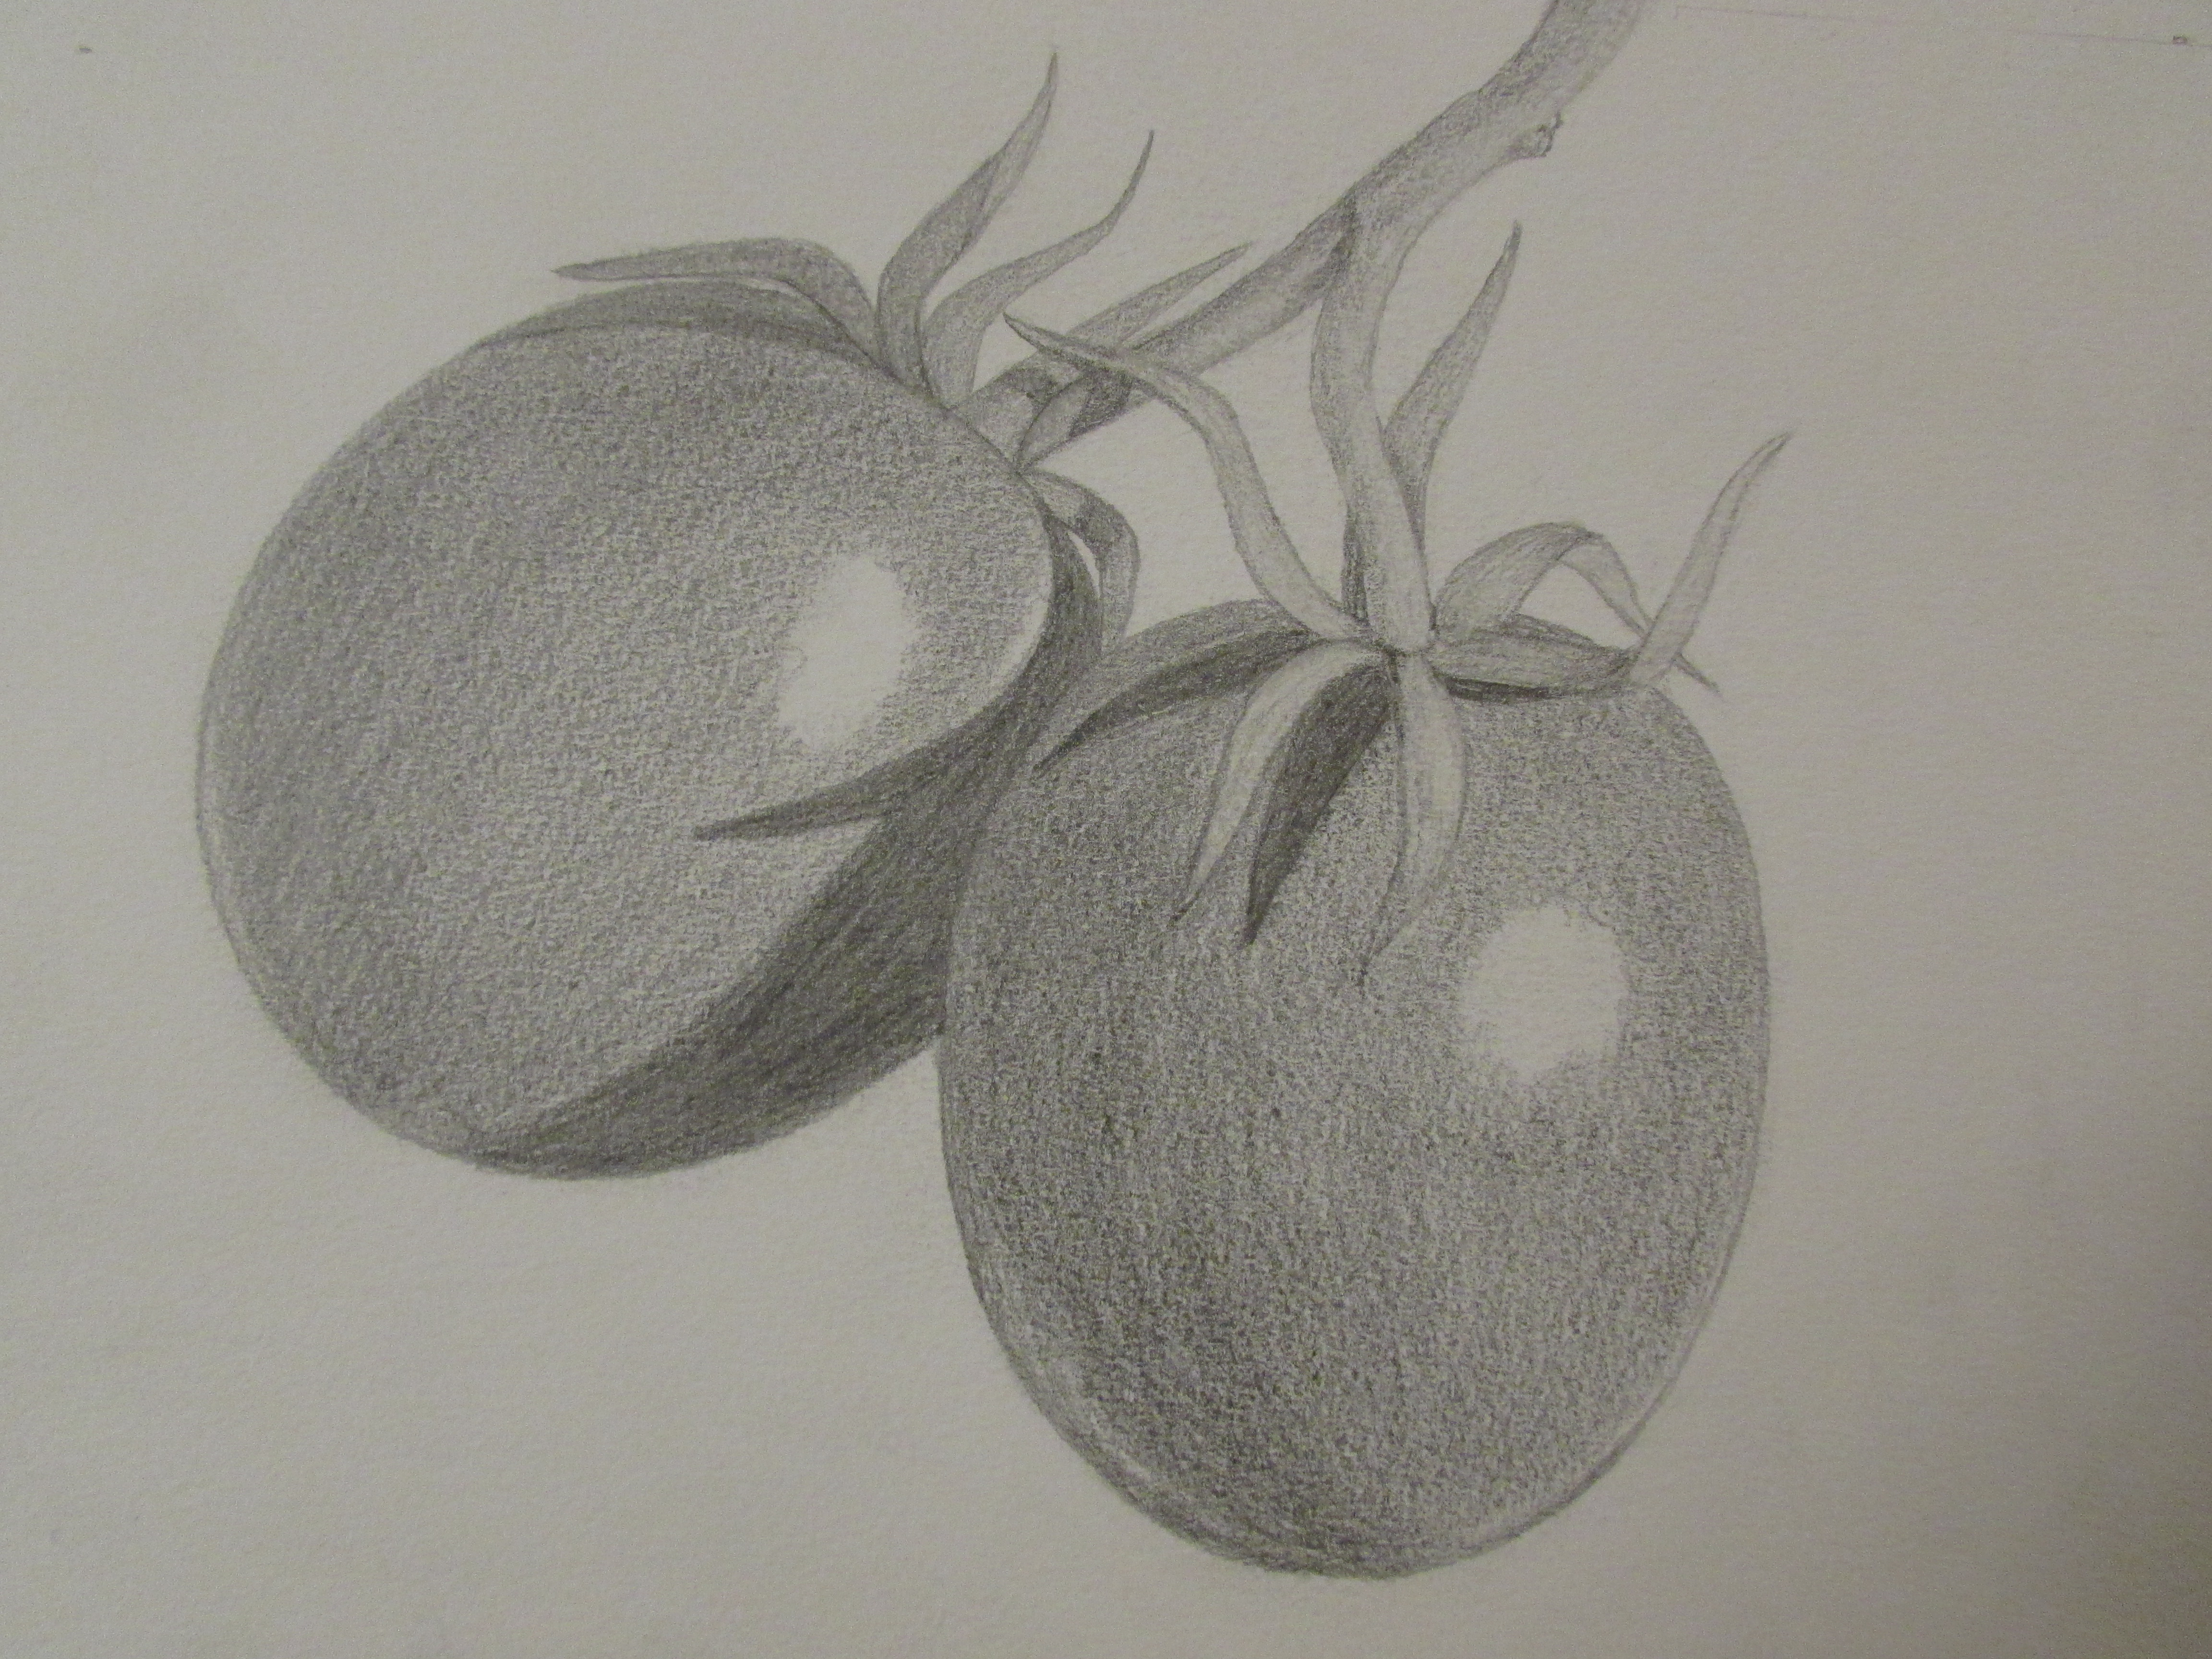 4608x3456 Pencil Sketches Of Fruits And Vegetables Pencil Drawings Of Fruit...